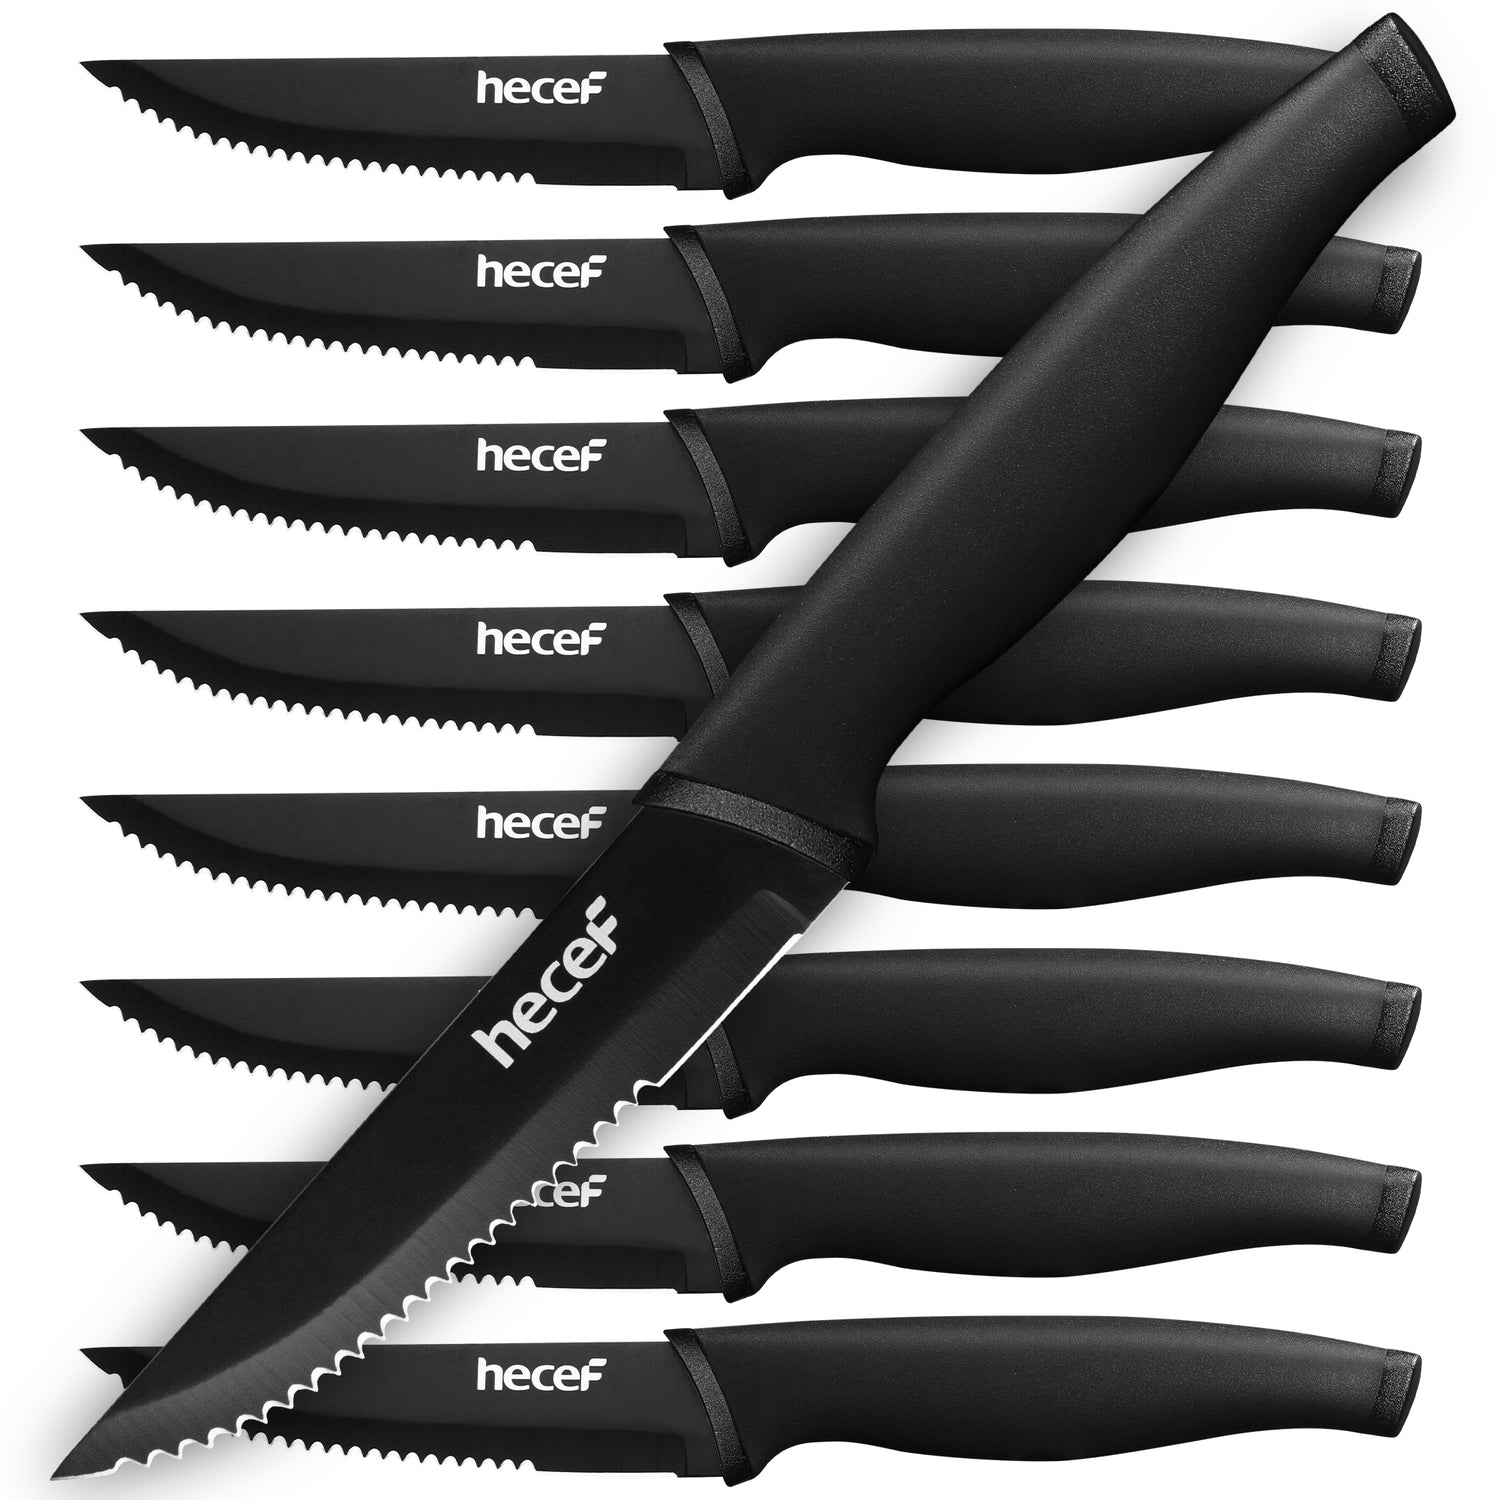  15pcs Kitchen Knife Set, Kitchen Knife Set with Block, High  Carbon Stainless Steel Knives with Wooden Handle: Home & Kitchen